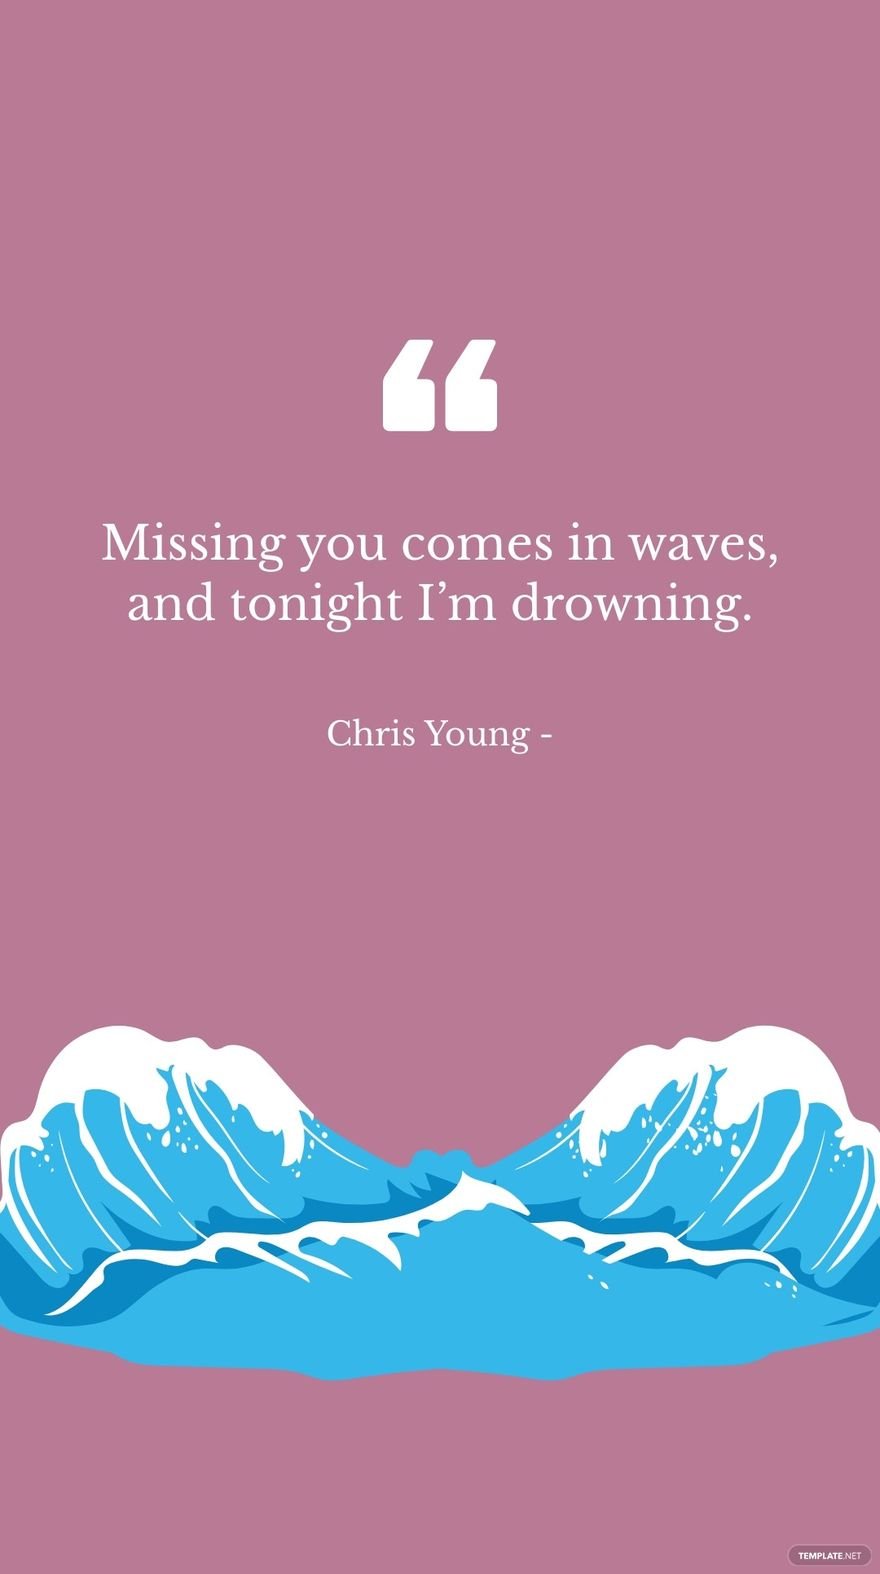 Free Chris Young - Missing you comes in waves, and tonight I’m drowning. in JPG